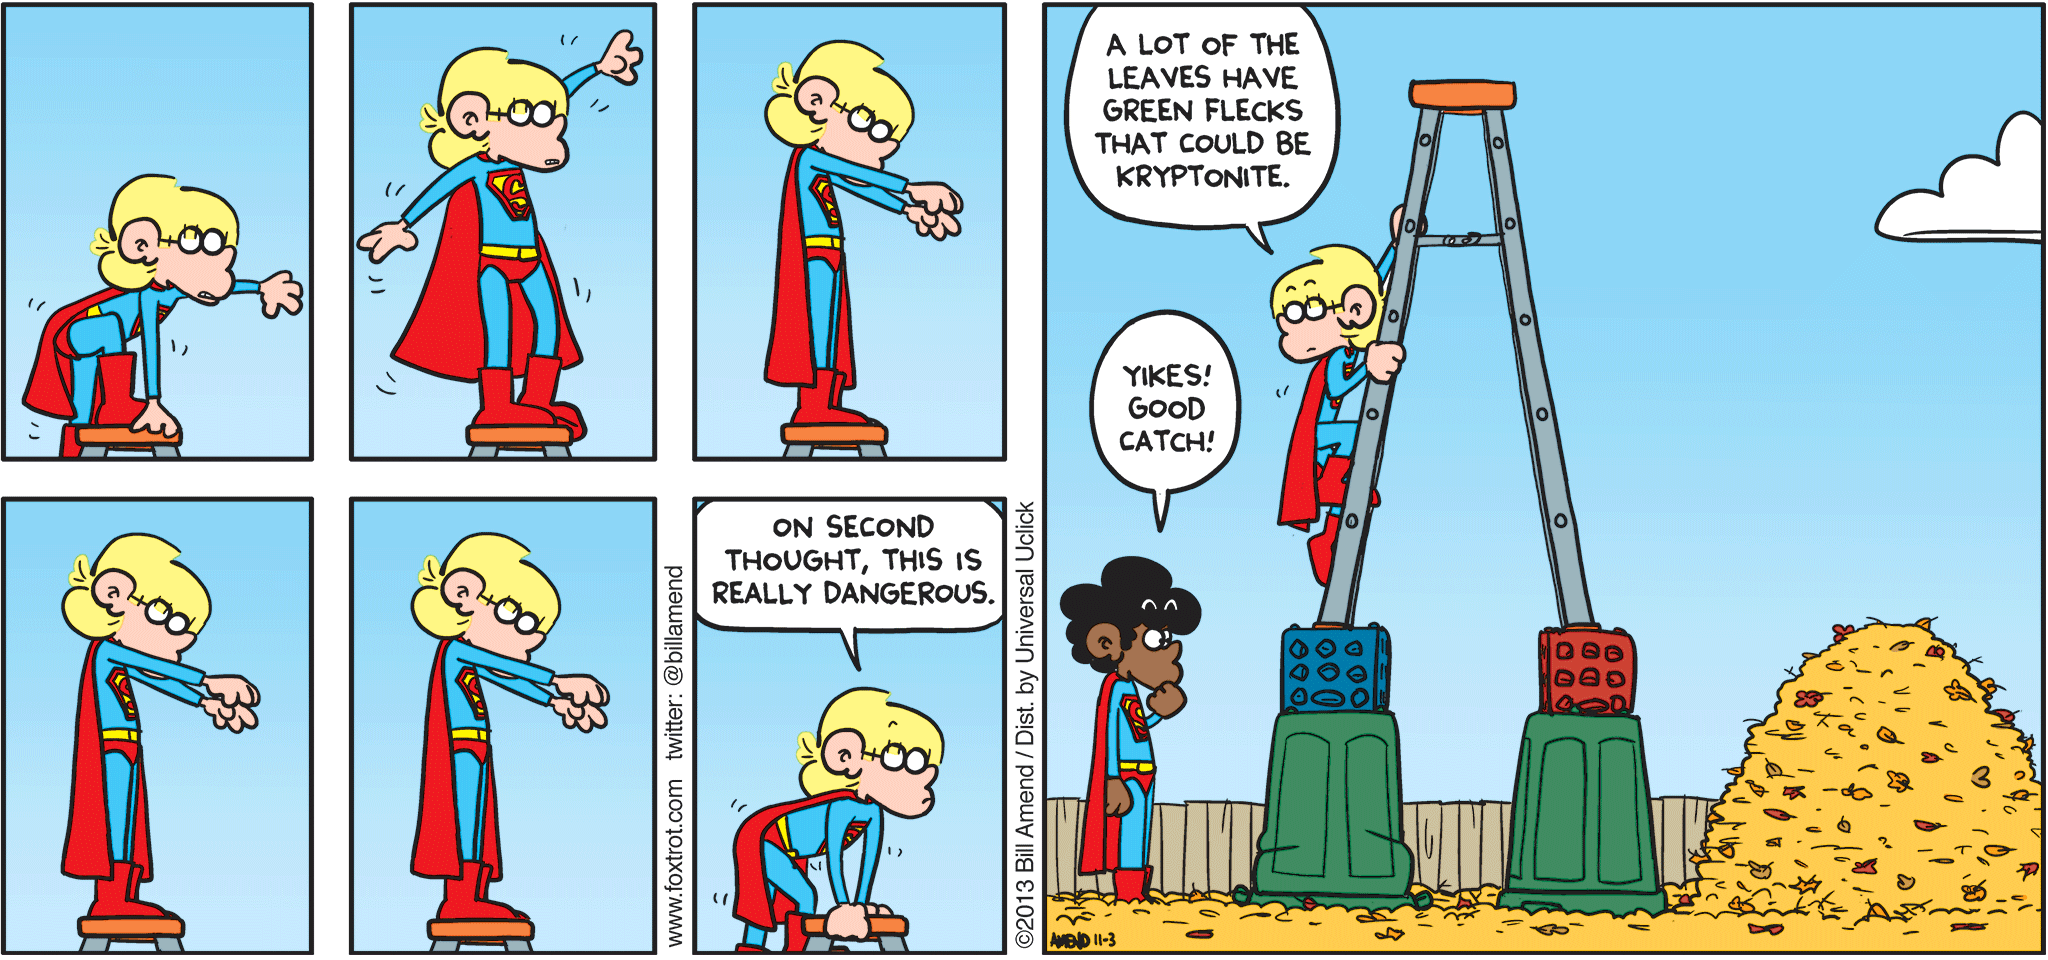 FoxTrot by Bill Amend - "Super Safe" published November 3, 2013 - Jason: On second thought, this is really dangerous. A lot of the leaves have green flecks that could be kryptonite. Marcus: Yikes! Good catch!